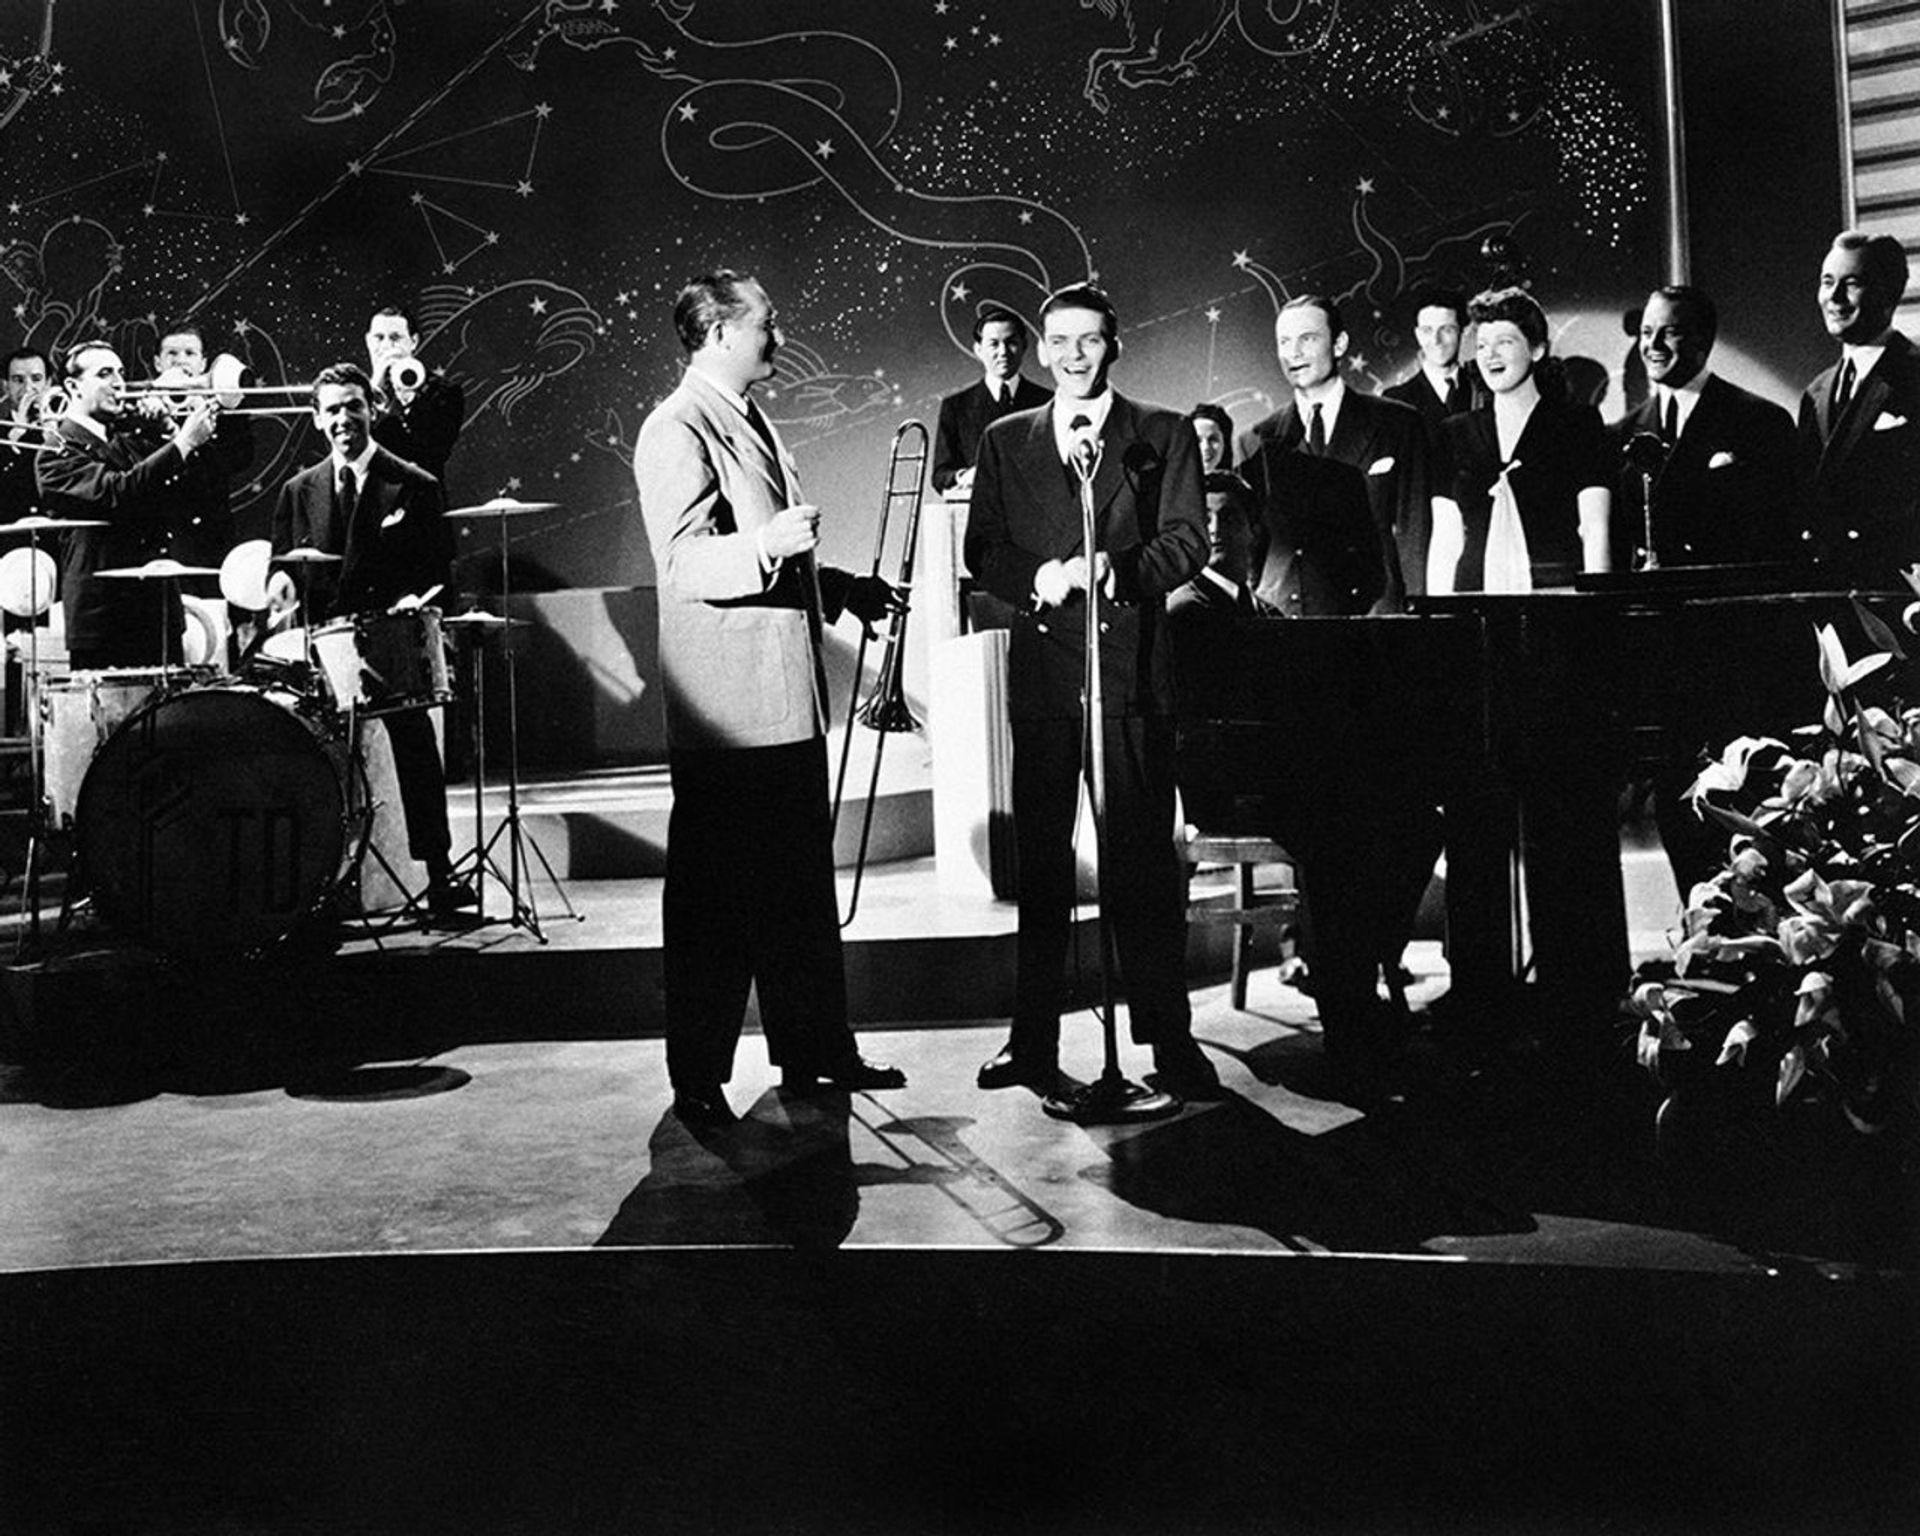 Frank Sinatra and Tommy Dorsey "Orchestra, 1942" Photo-Print